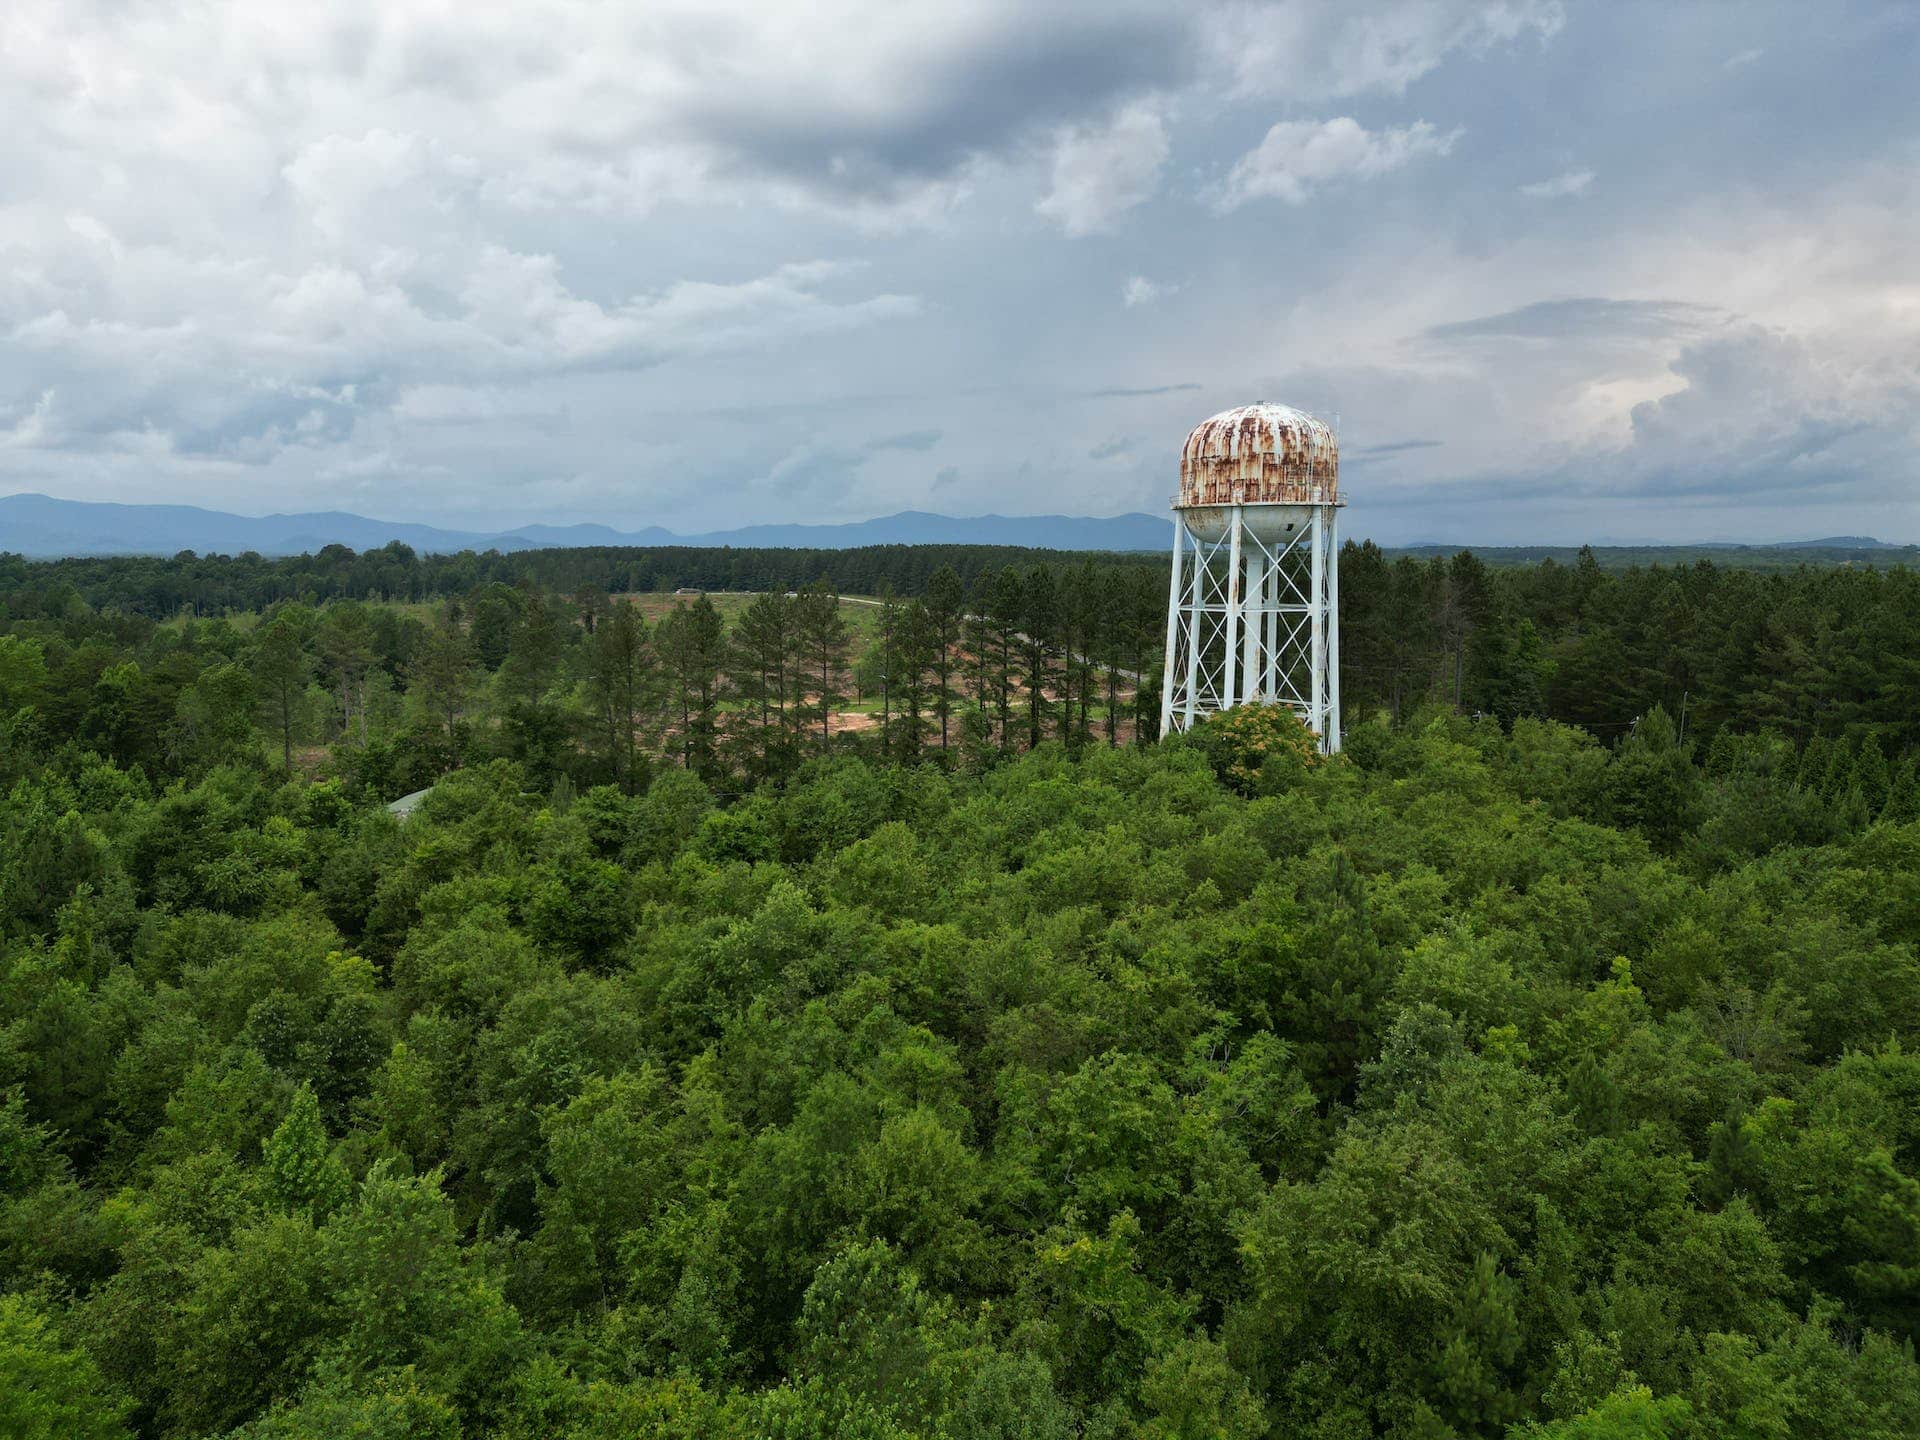 A water tower in the middle of a forest in tennessee